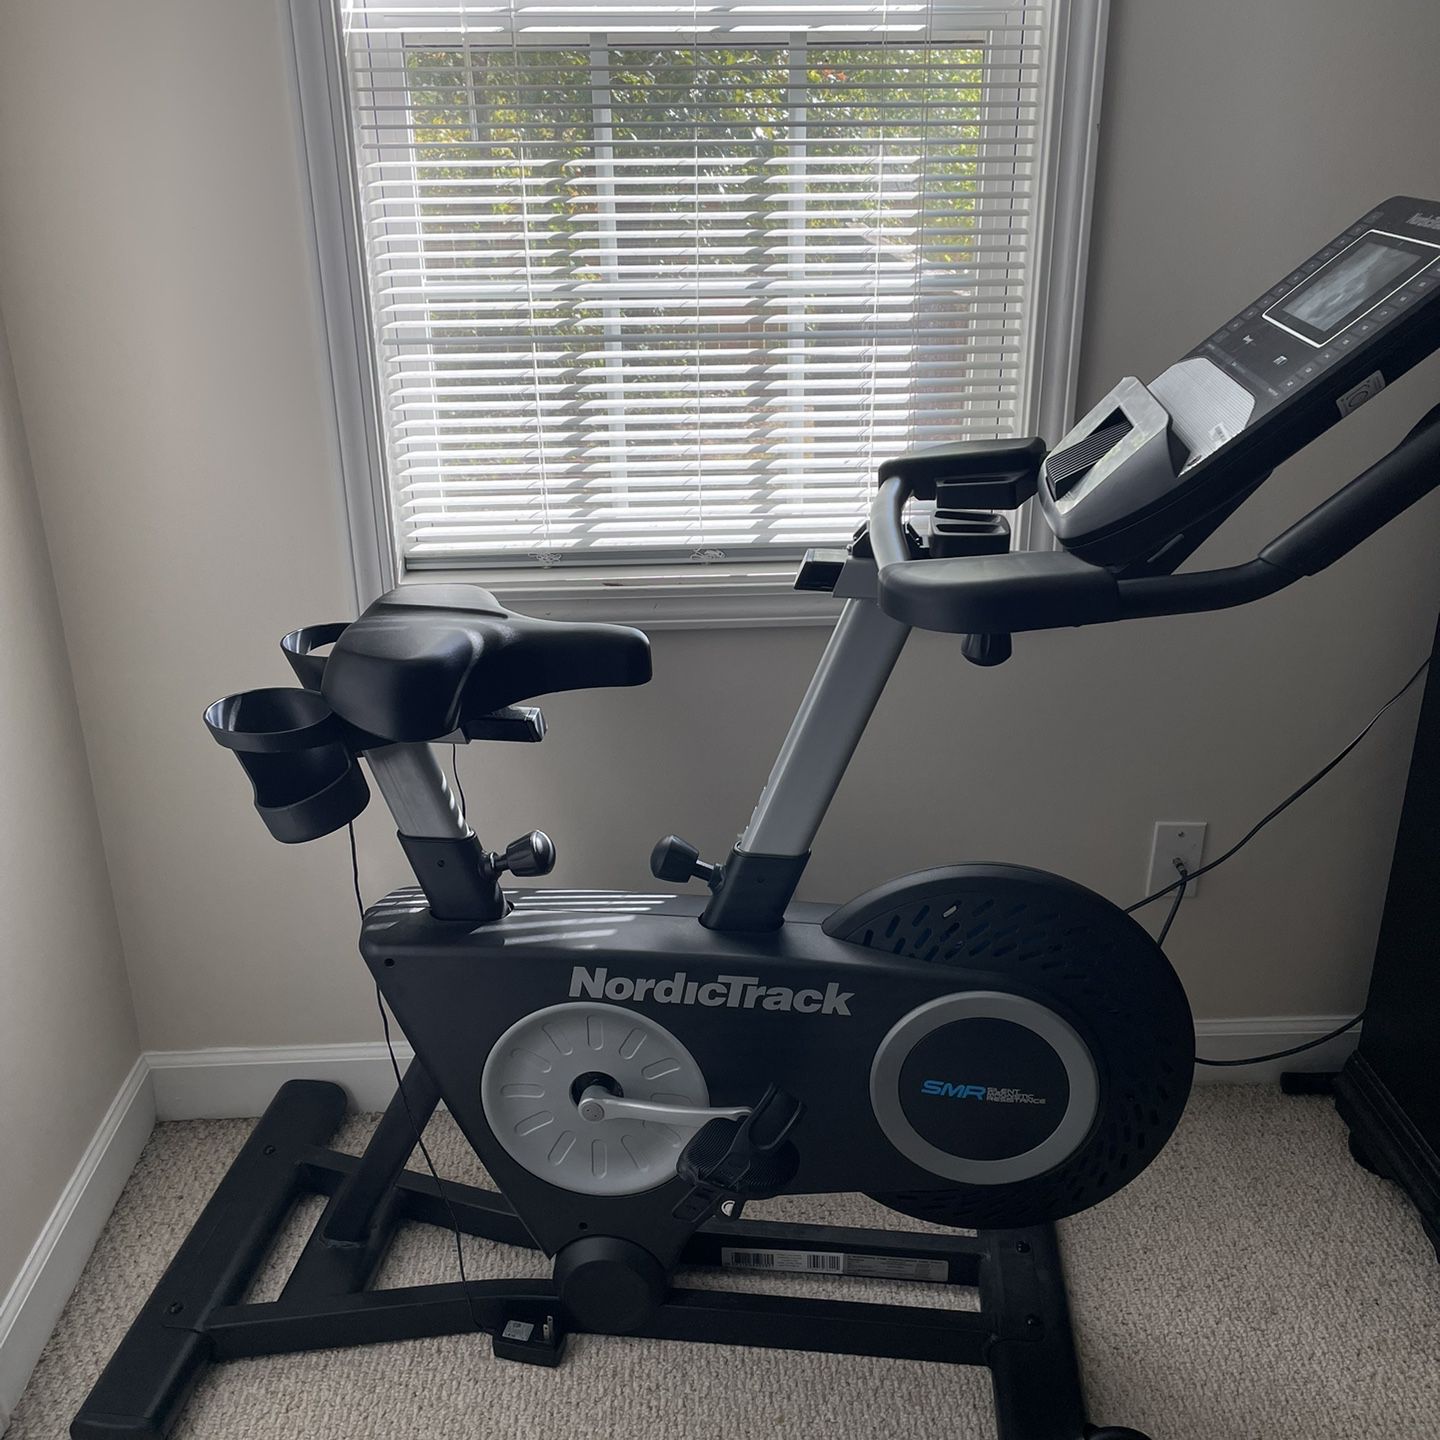 NordicTrack Exercise Bike For Sale